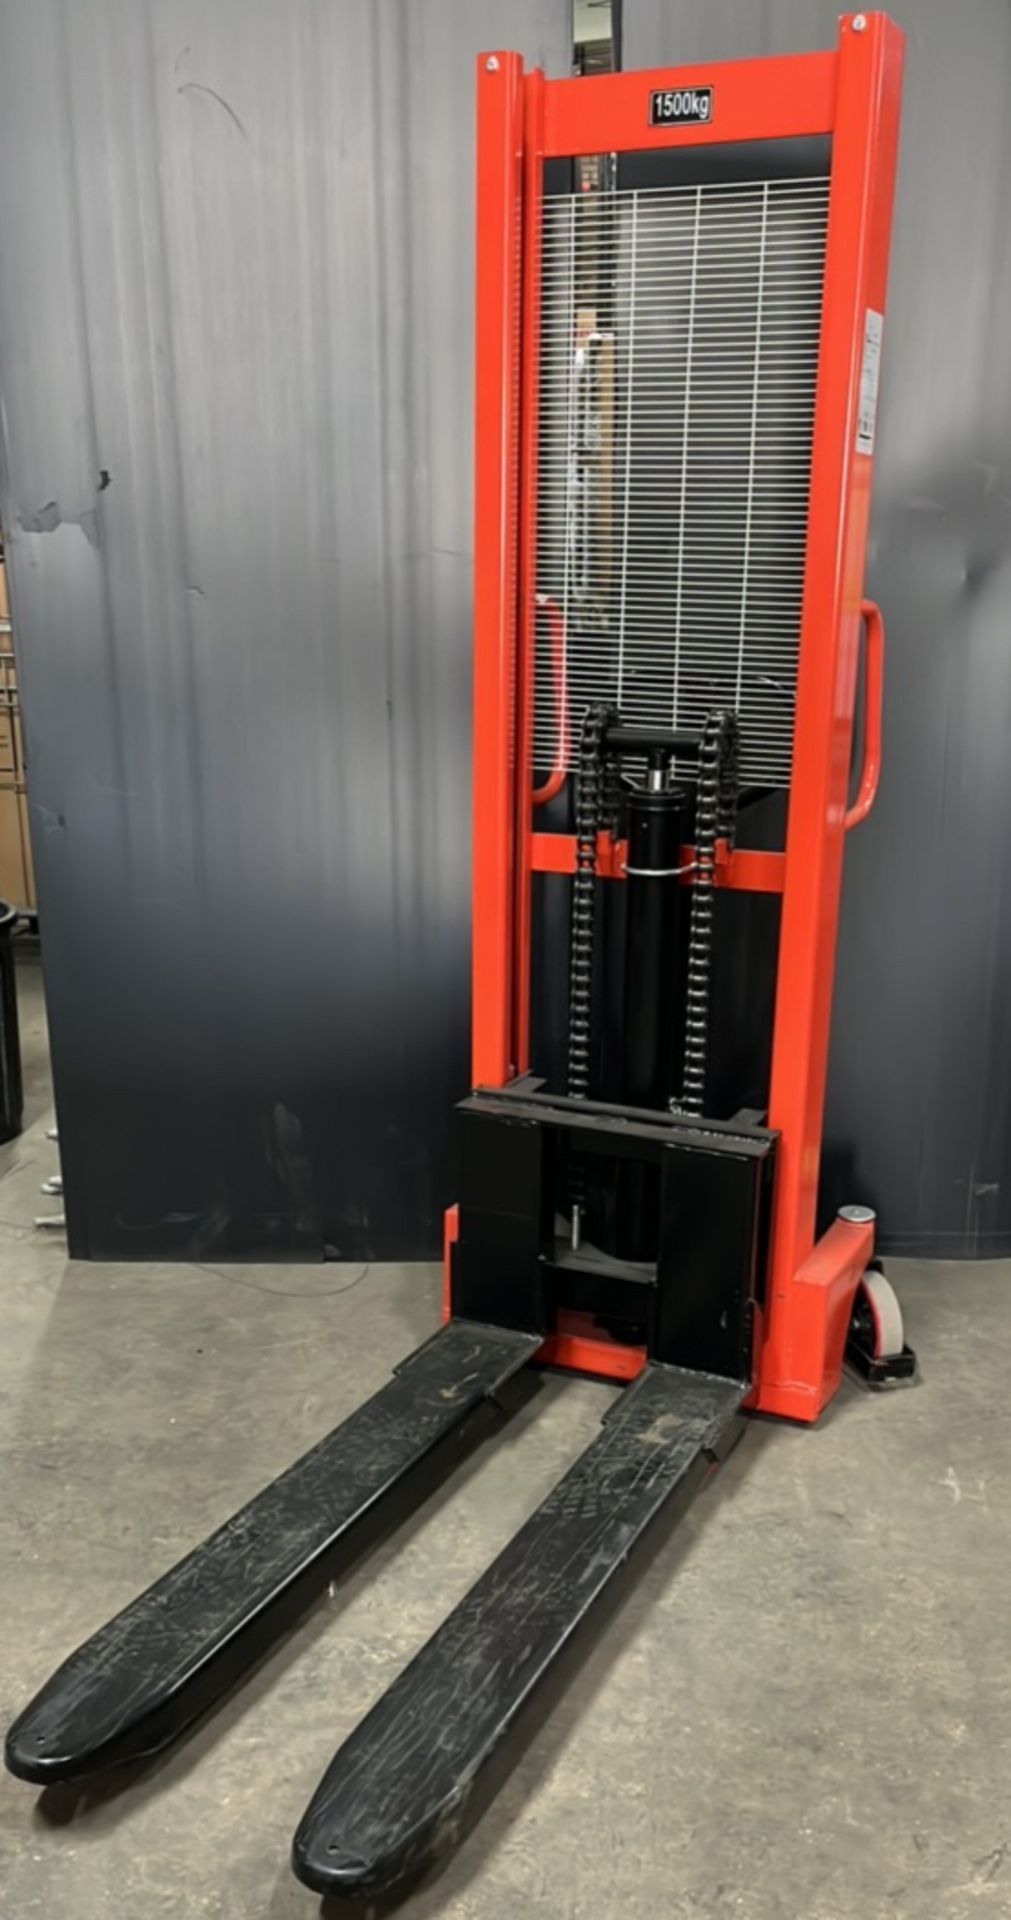 Unbranded Euro Pallet Stacker Hydraulic Hand Forklift